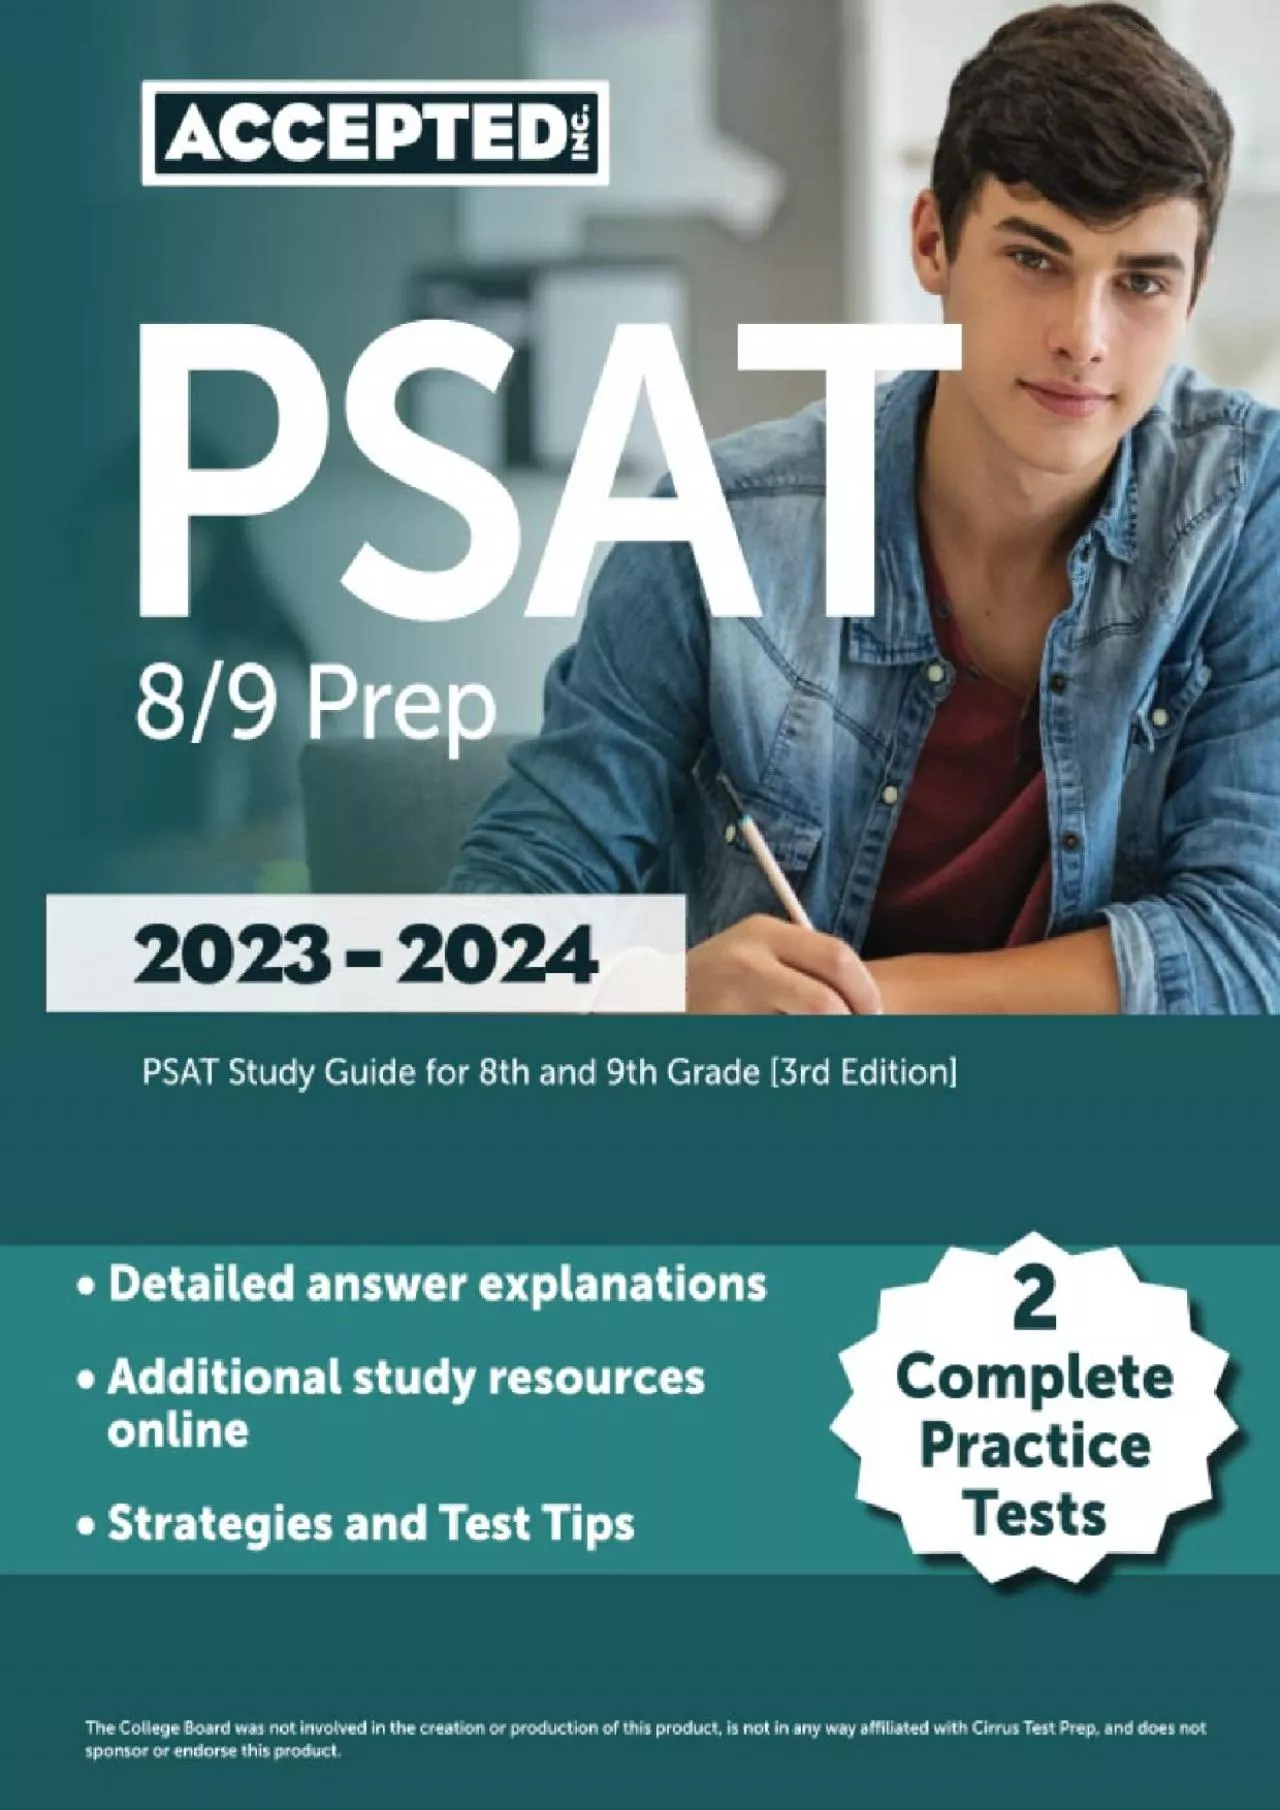 [EBOOK] PSAT 8/9 Prep 2023-2024: 2 Complete Practice Tests, PSAT Study Guide for 8th and